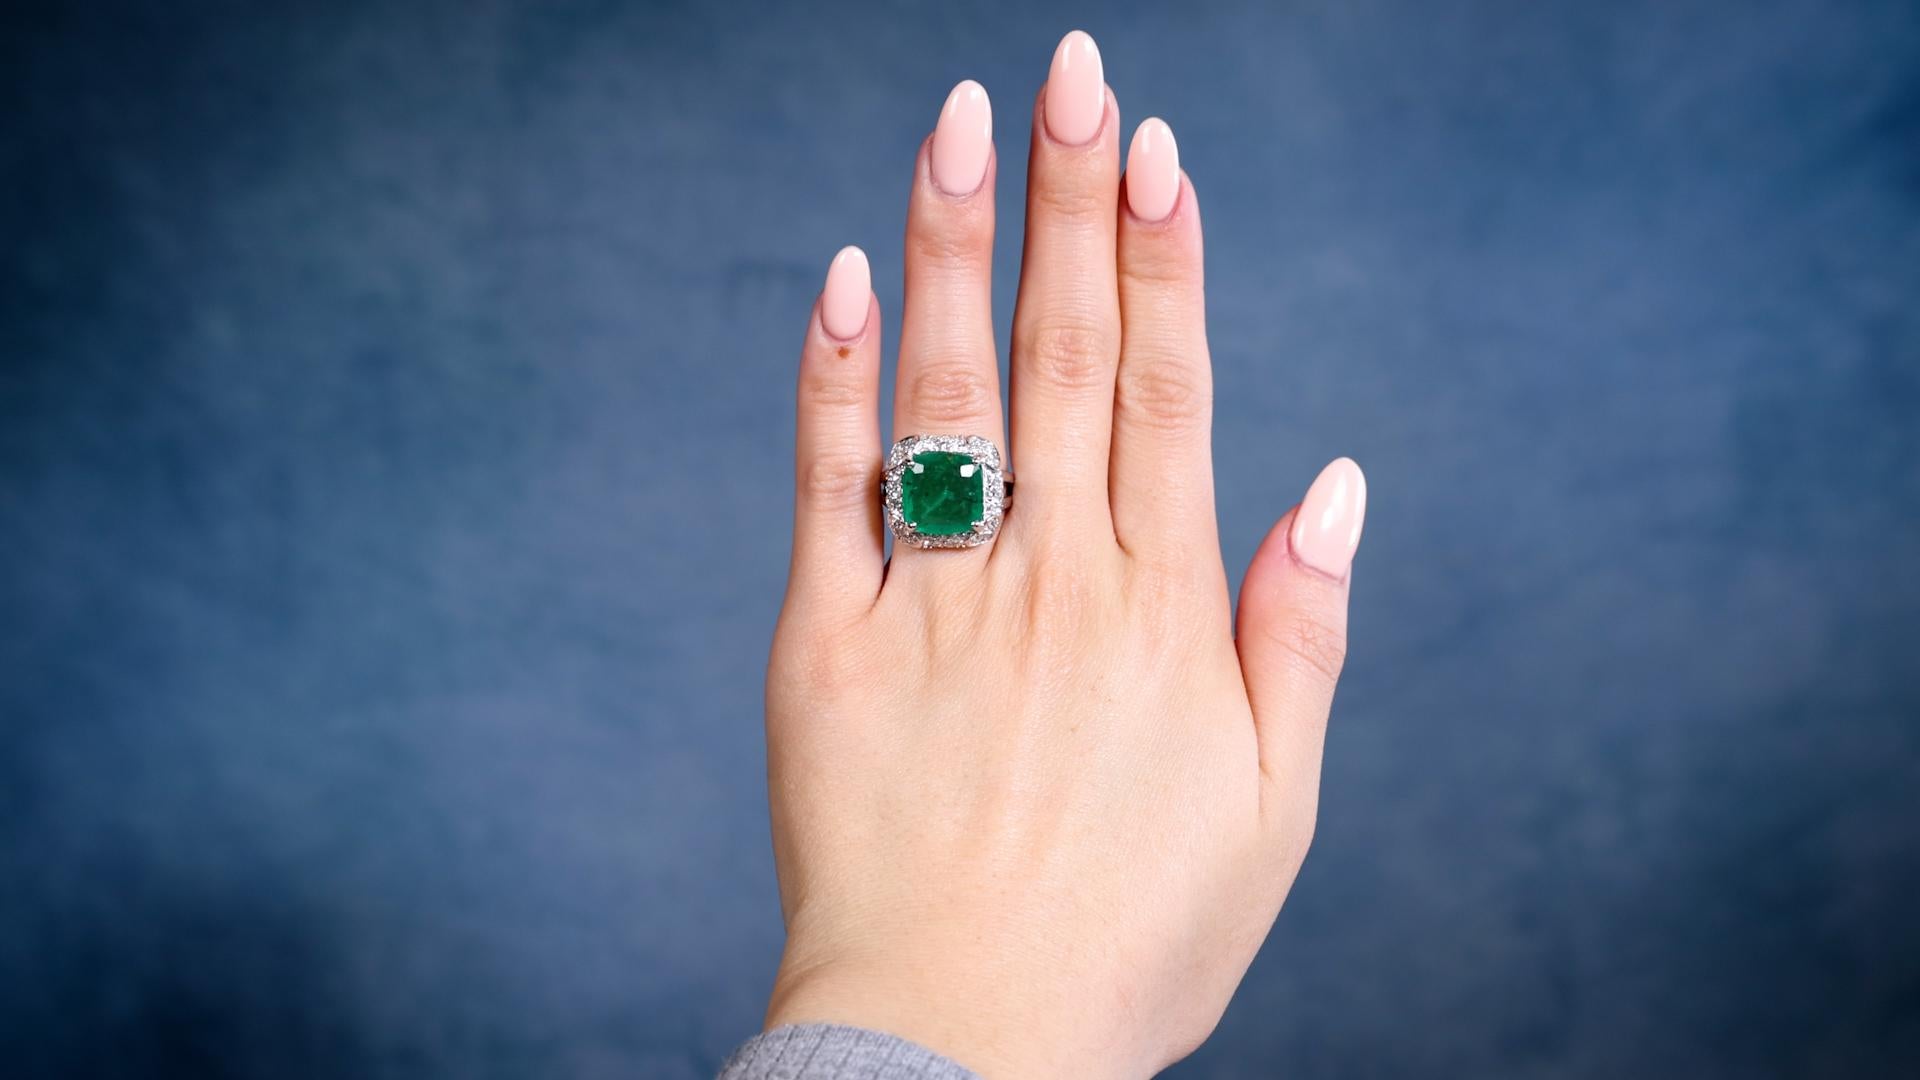 One Vintage GIA 4.00 Carat Zambian Emerald Diamond 14k White Gold Ring. Featuring one GIA cushion mixed cut emerald weighing approximately 4.00 carats, accompanied by GIA #2231188764 stating the emerald is of Zambian origin. Accented by 56 single